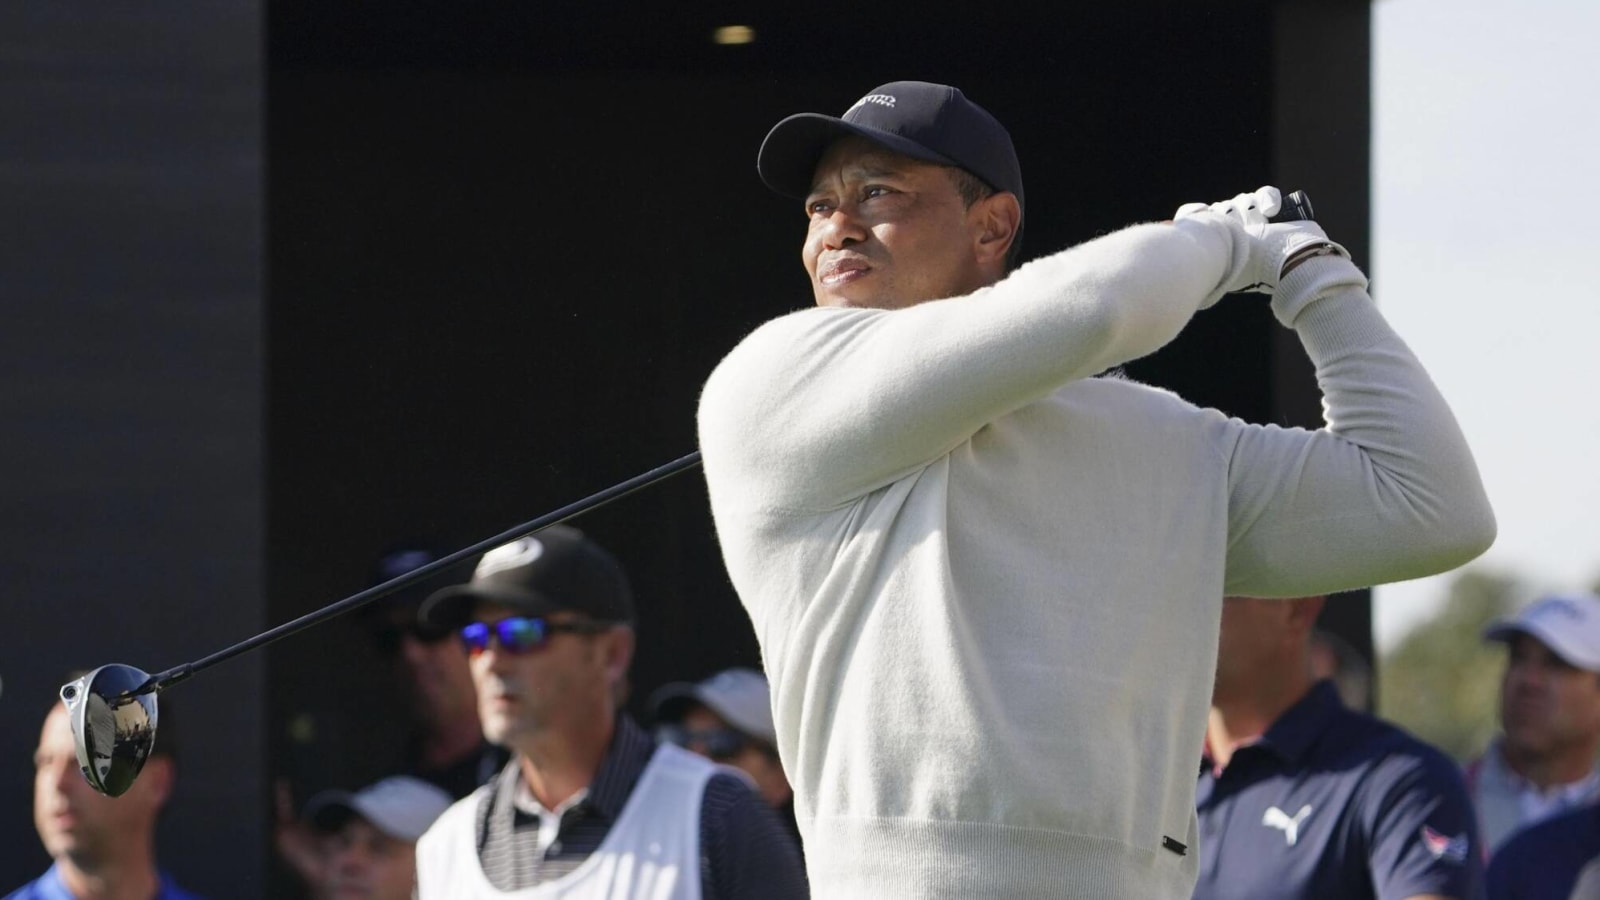 Which tournament is Tiger Woods participating next following withdrawal from Genesis Invitational?